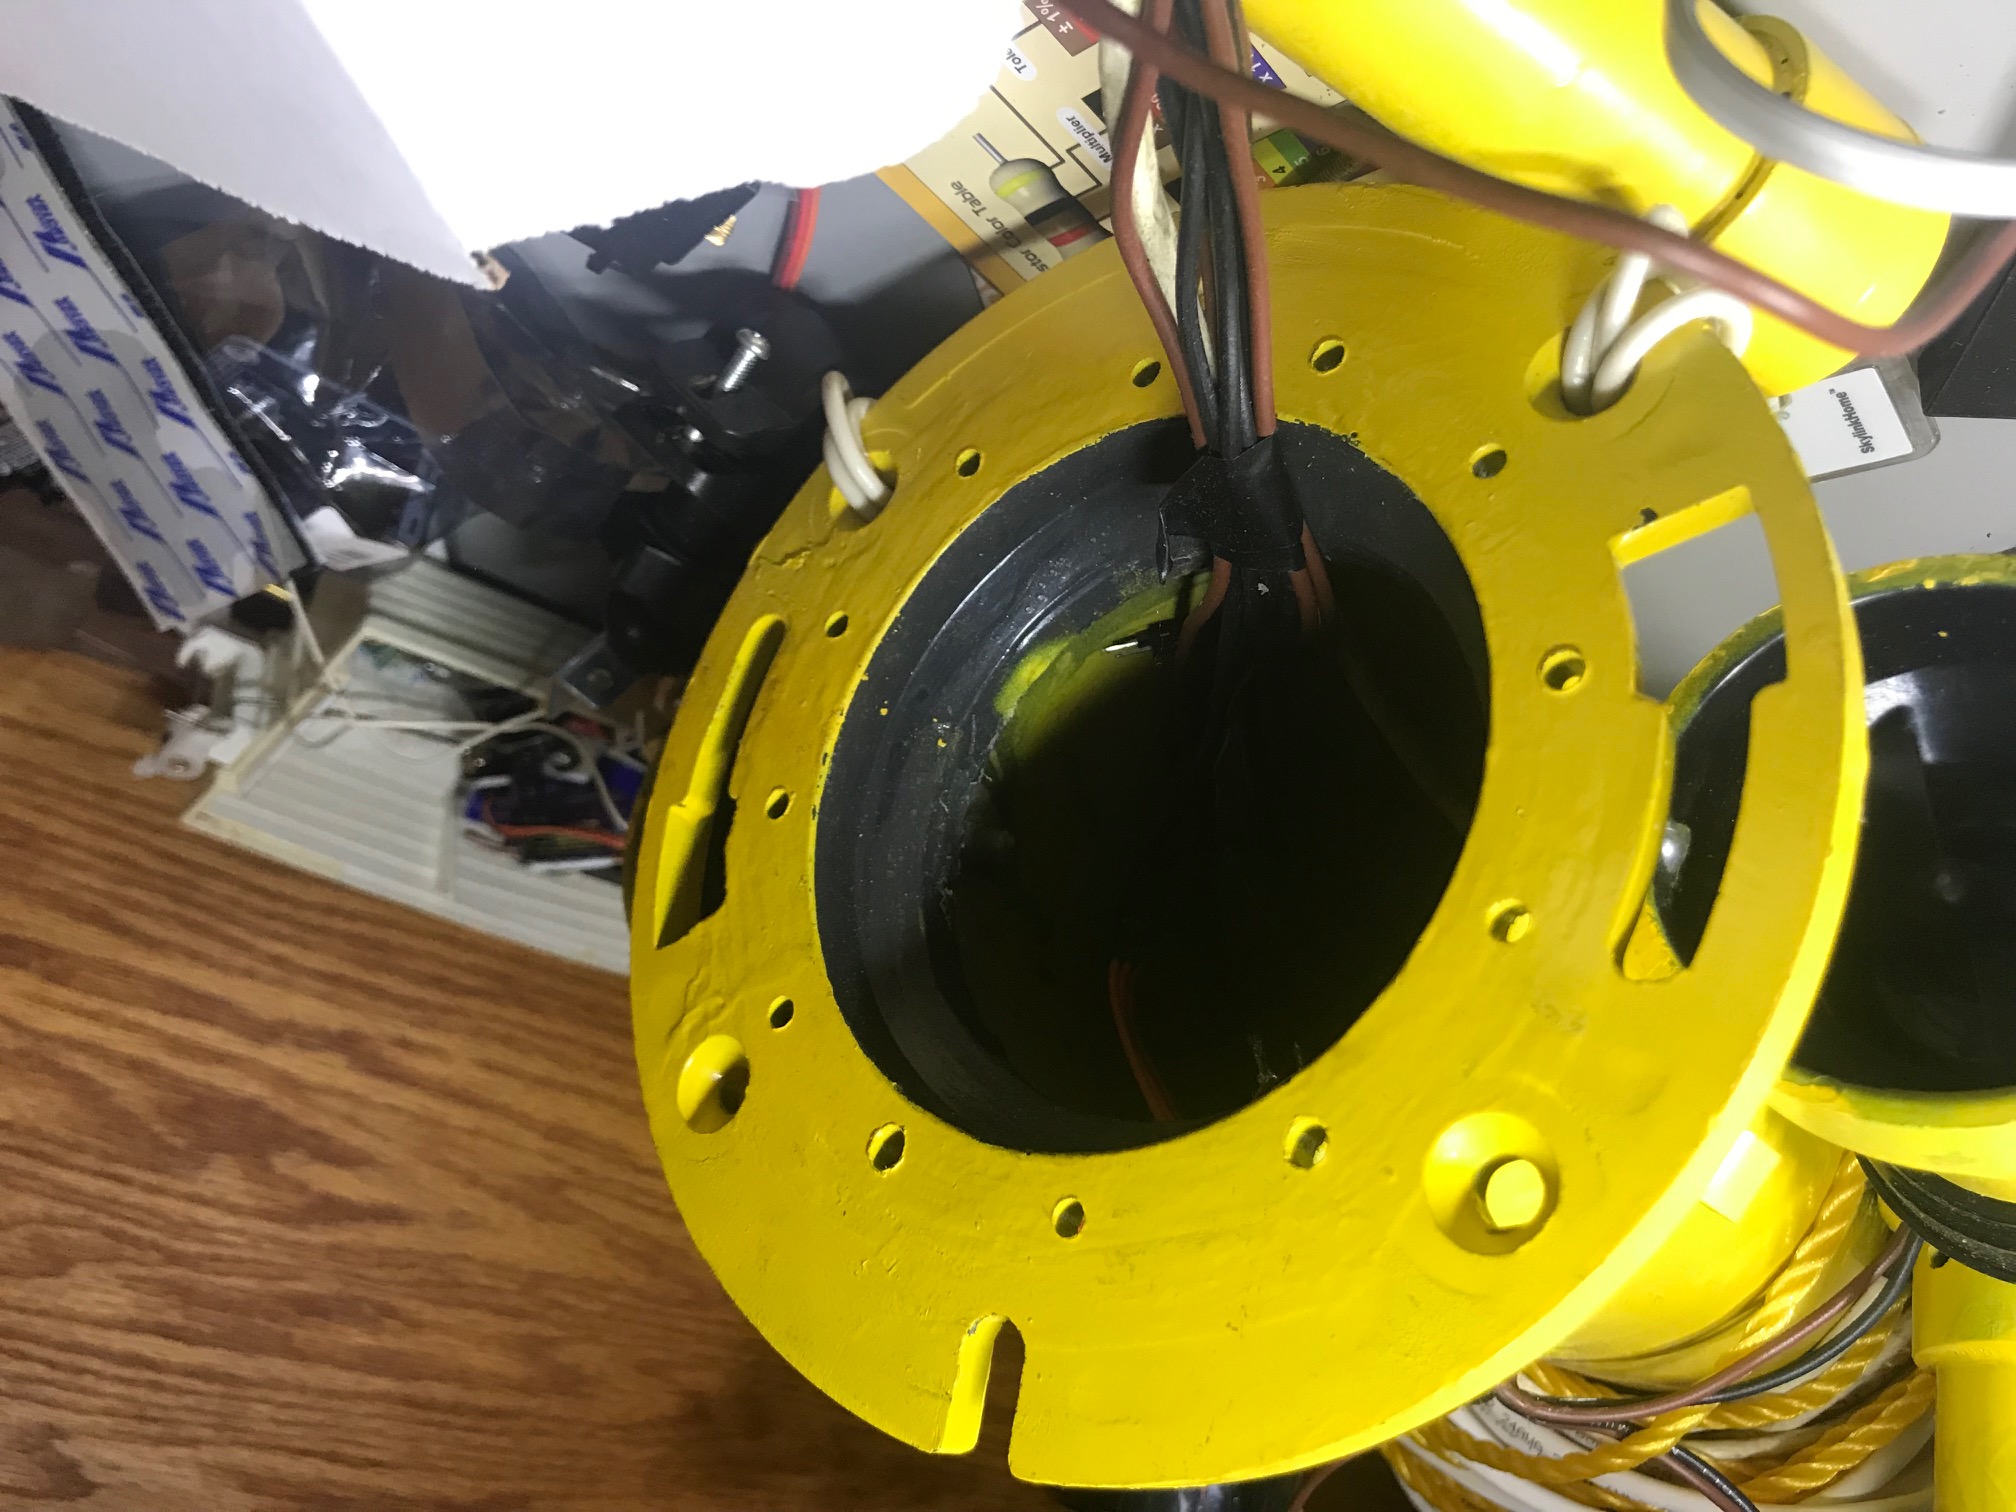 Front of ROV, main body (Toilet flange)